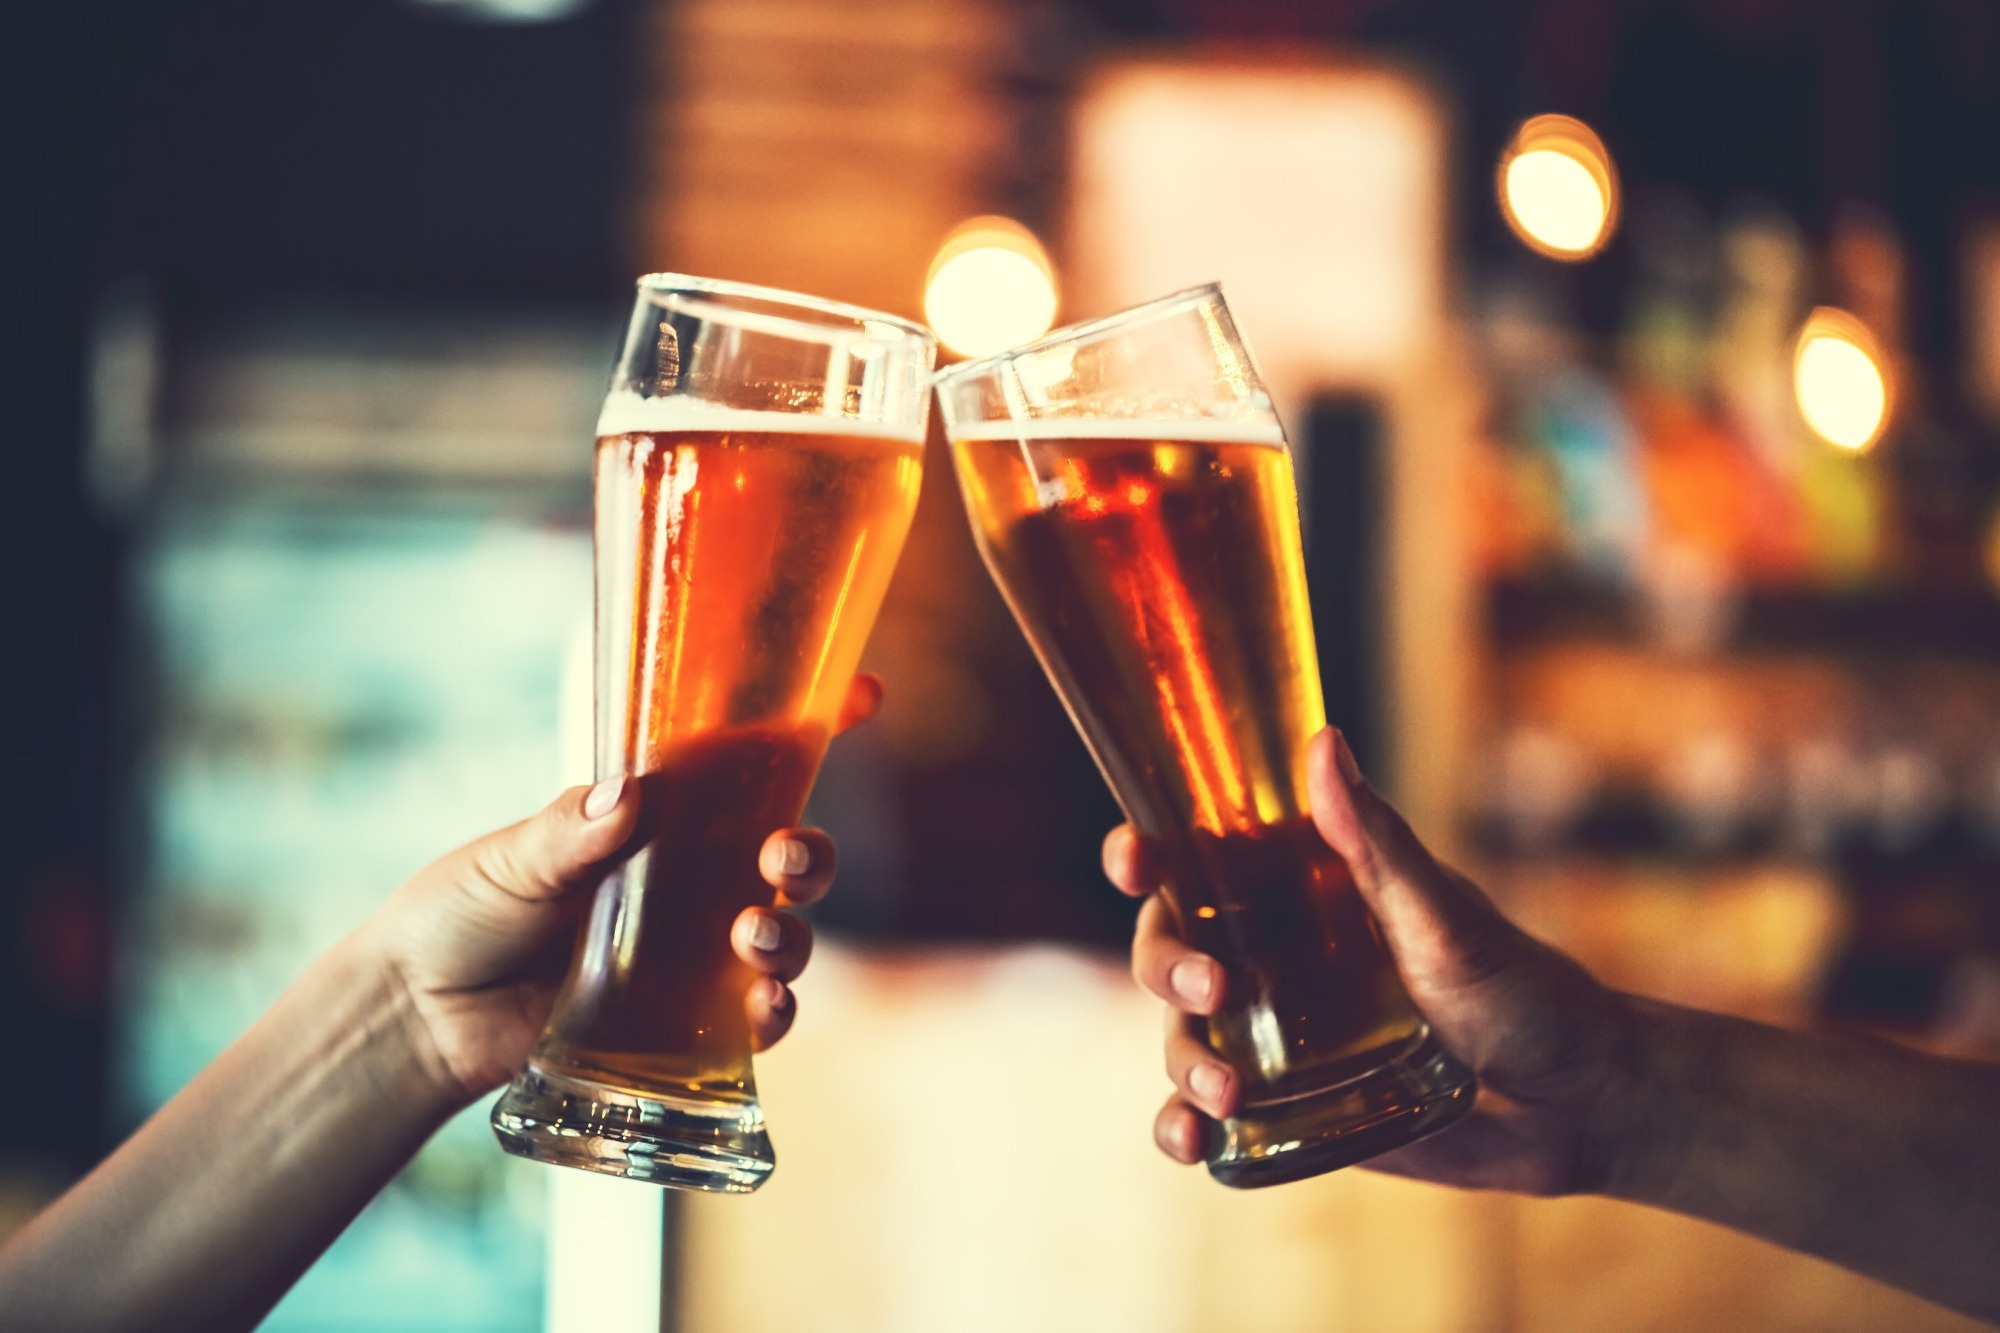 Study: The relationship between alcohol consumption and health: J-shaped or less is more? Image Credit: Ievgenii Meyer / Shutterstock.com